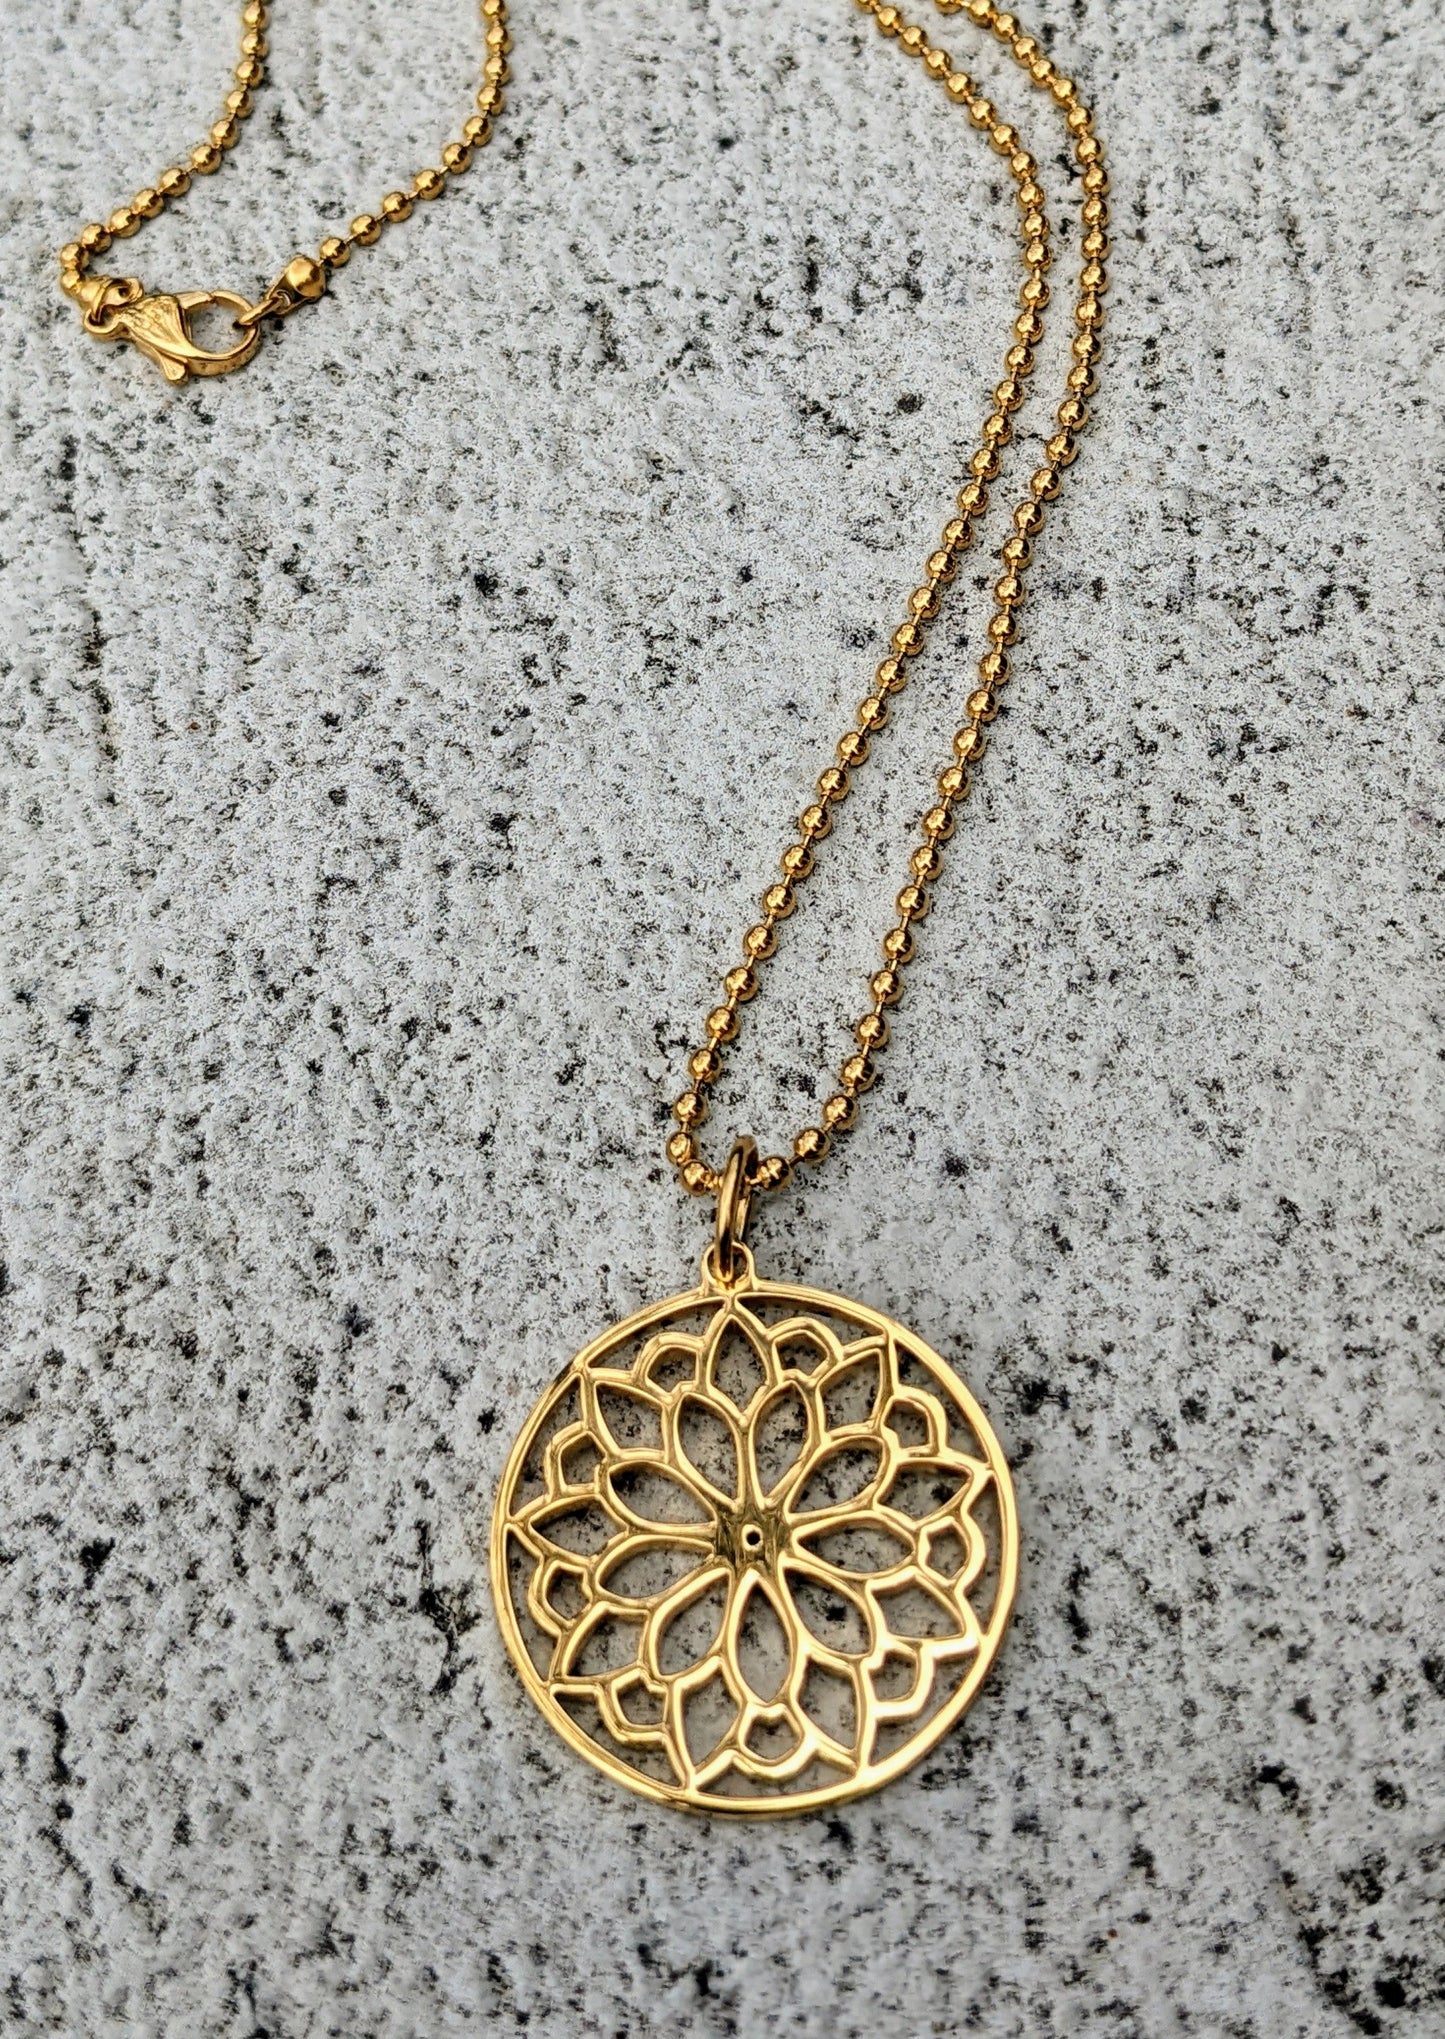 Stainless steel Mandala charm necklace gold